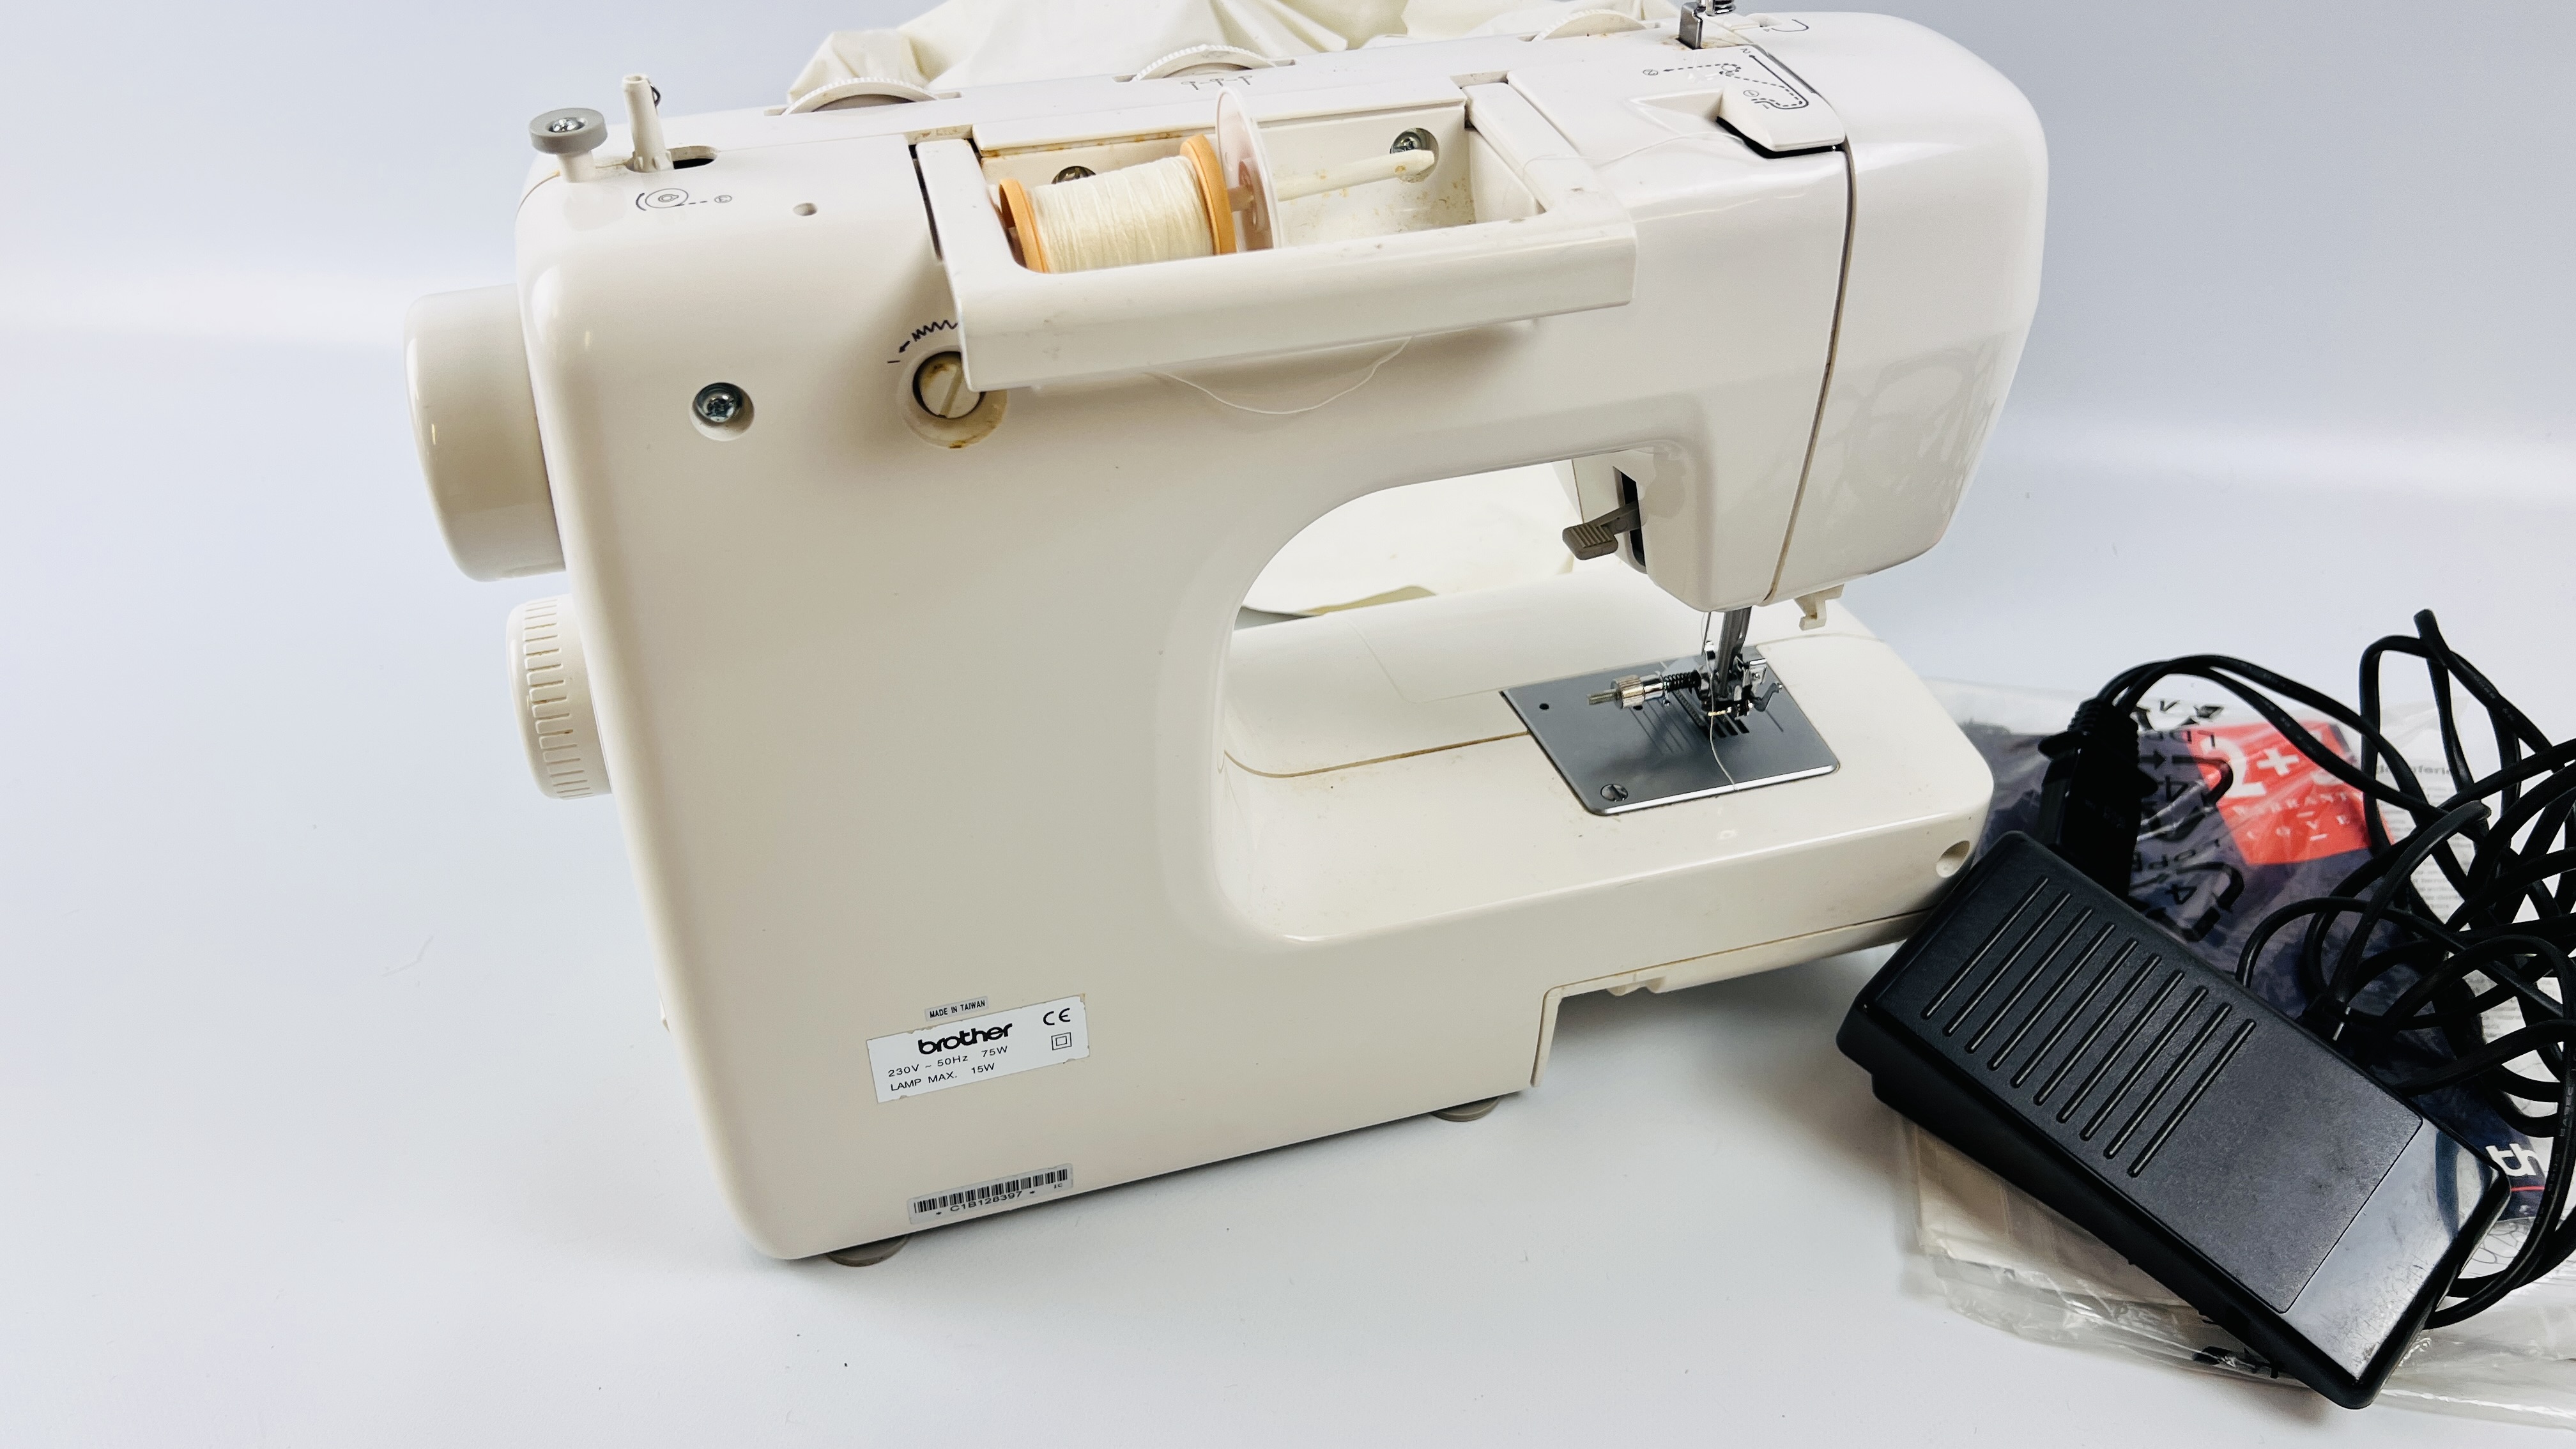 BROTHER PS-33 ELECTRIC QUICK SYSTEM SEWING MACHINE WITH FOOT PEDAL AND INSTRUCTIONS - SOLD AS SEEN. - Image 6 of 6